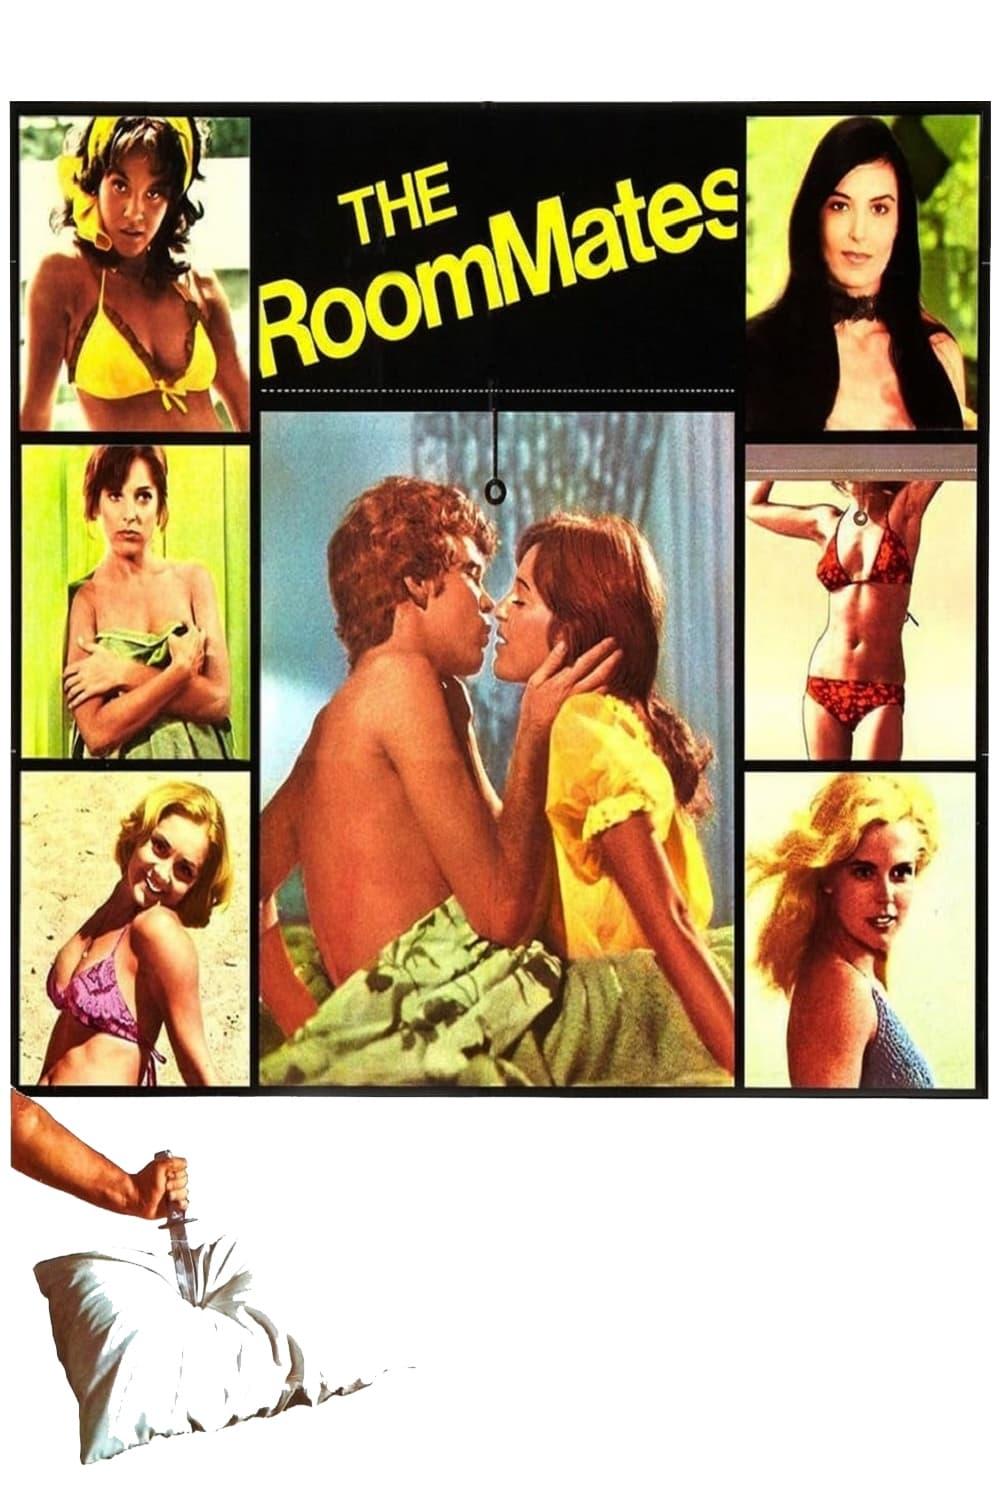 The Roommates poster